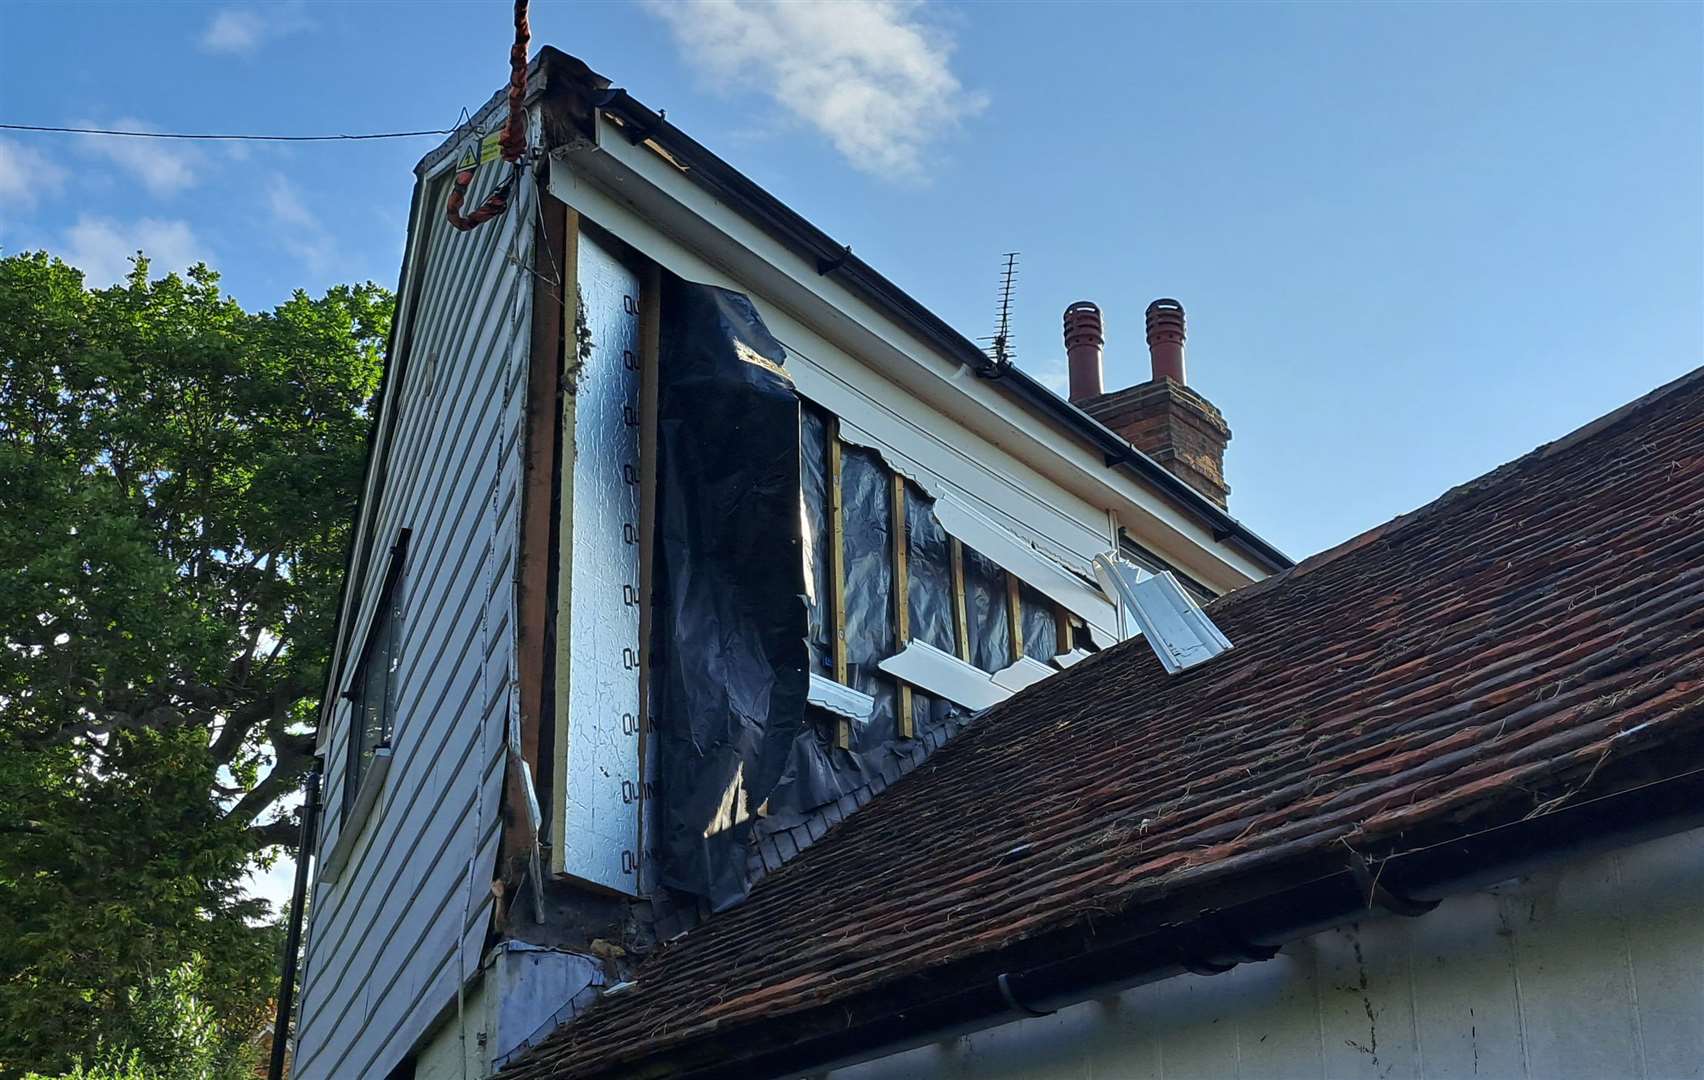 The damage to the house in Shoreham Lane